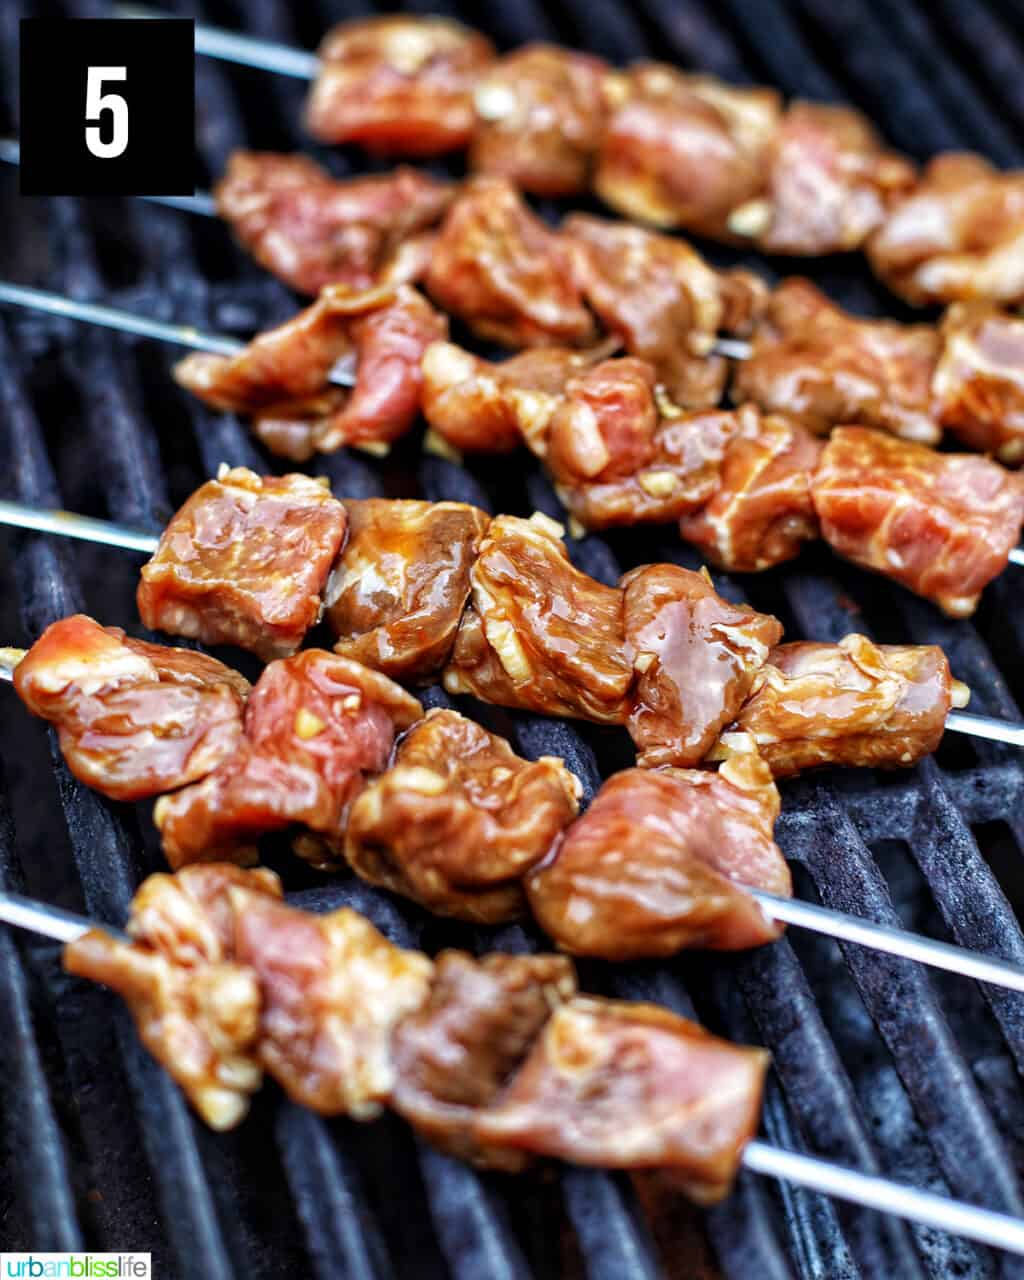 Filipino BBQ pork skewers on the grill